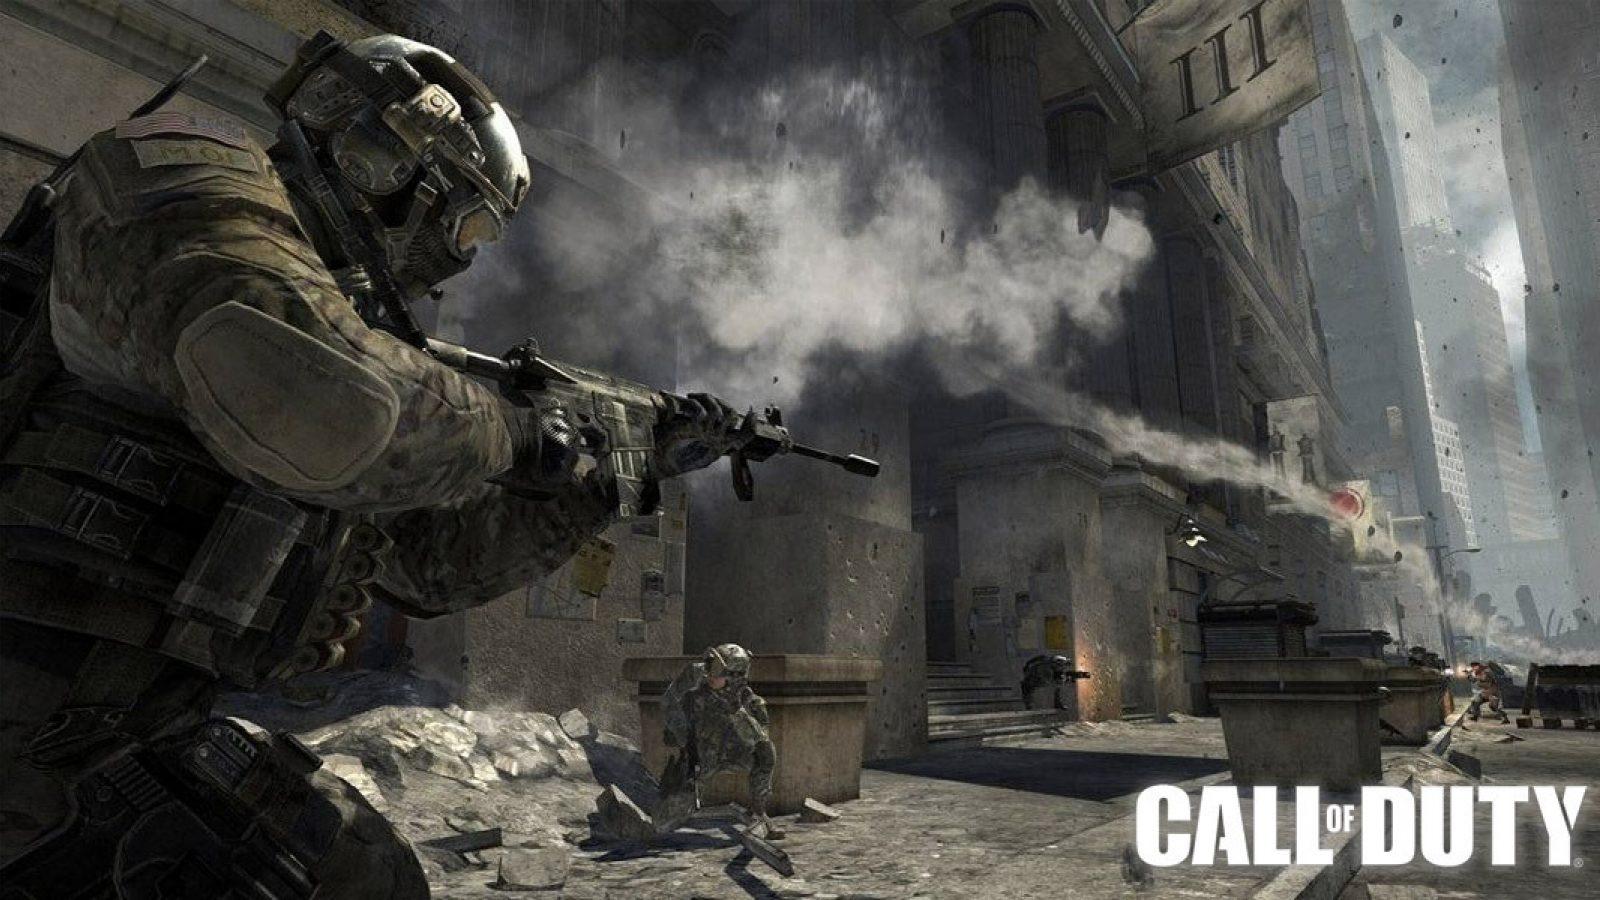 Solved (4 points) Activision has released a new Call of Duty